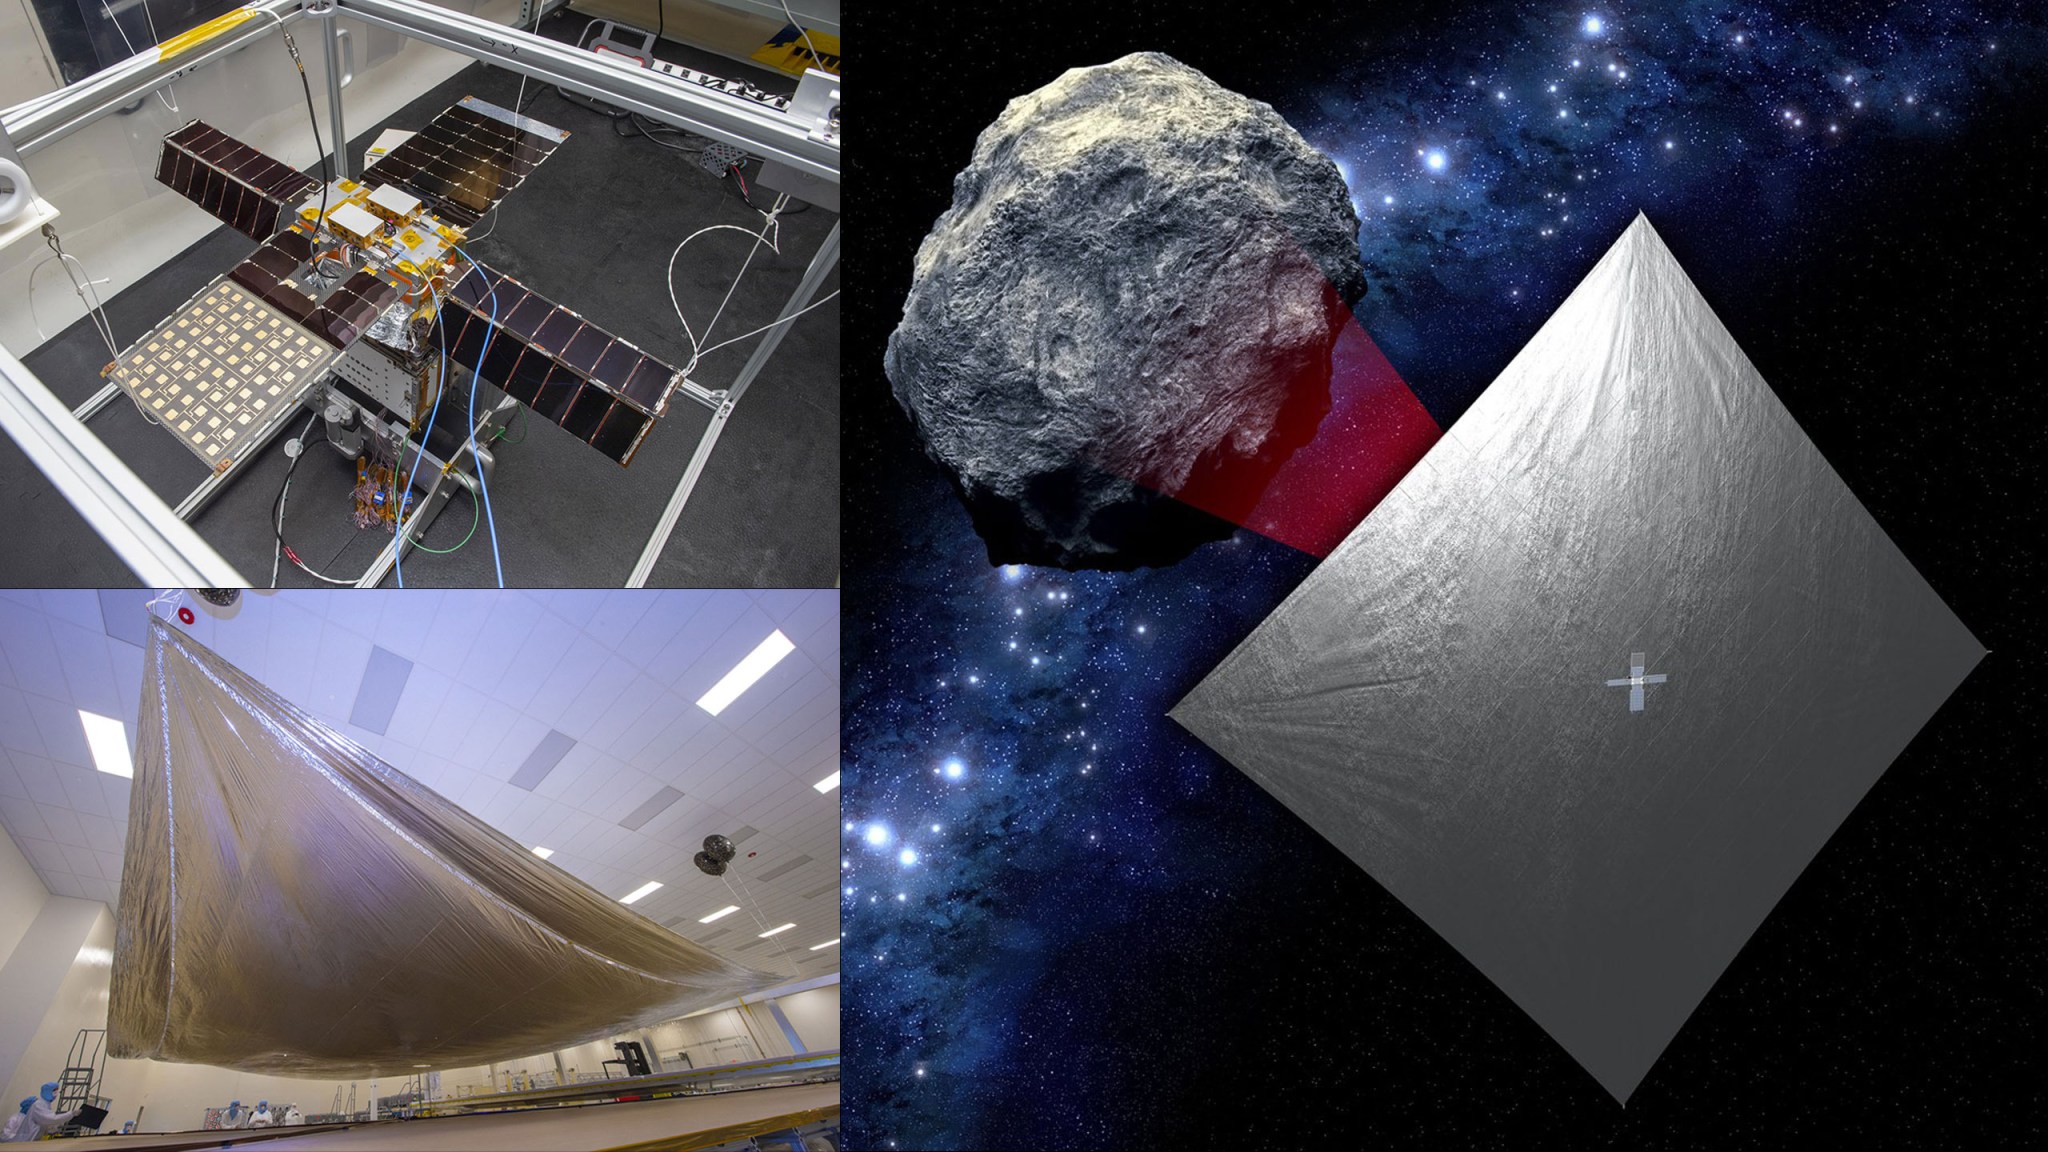 Top left: NEA Scout CubeSat, Bottom left: Aluminum-coated solar sail, Right: Illustration of the sail propelling NEA Scout to a small asteroid